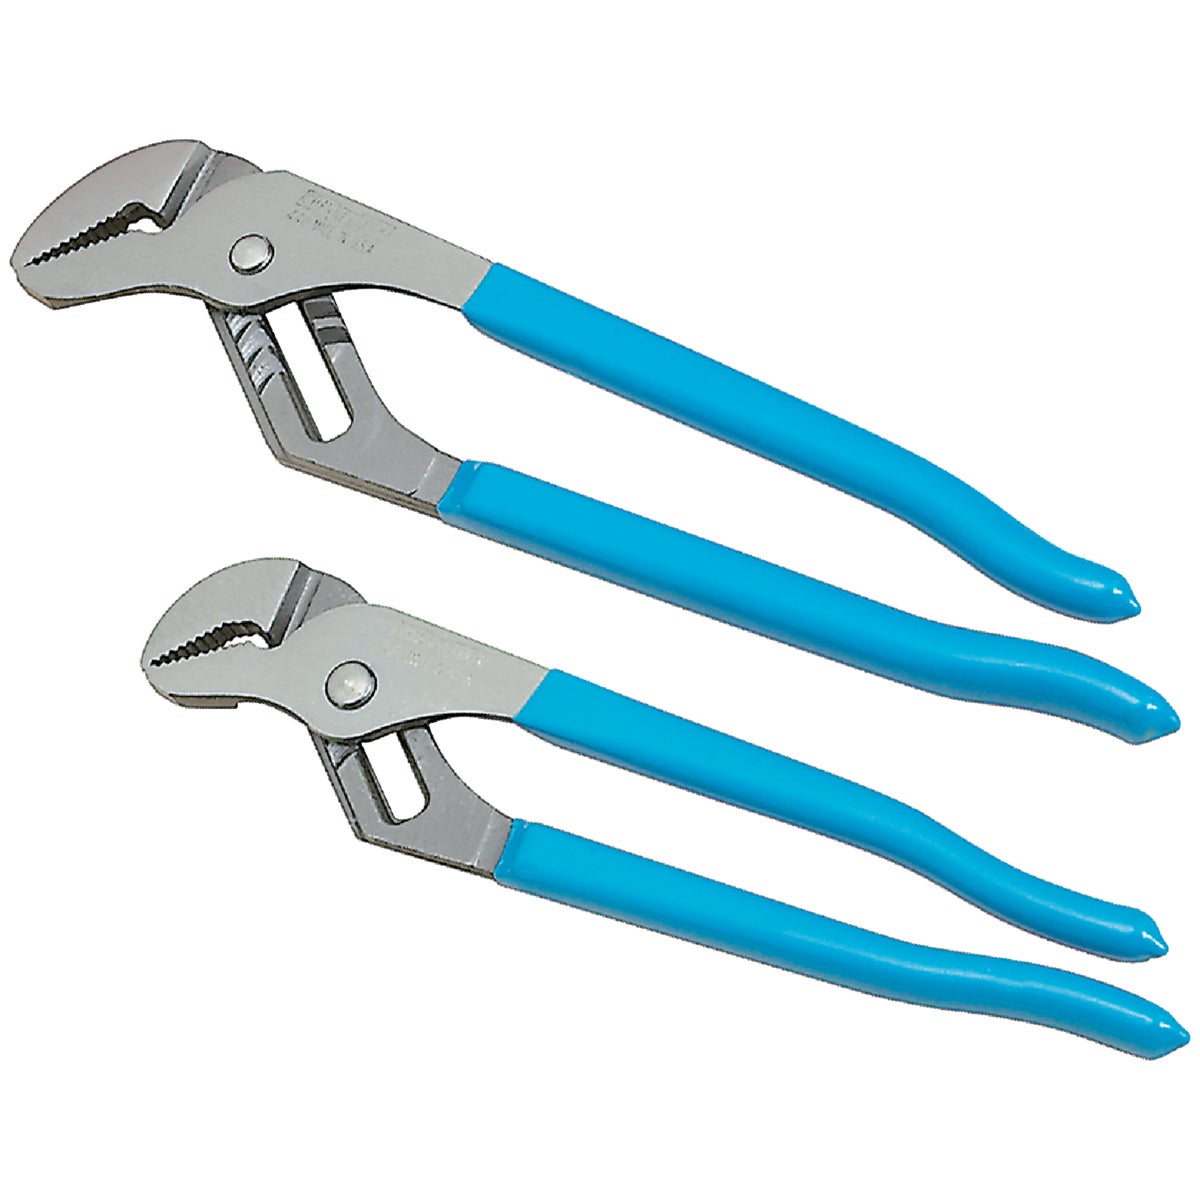 Channellock 9-1/2 In. and 12 In. Groove Joint Plier Set (2-Piece)